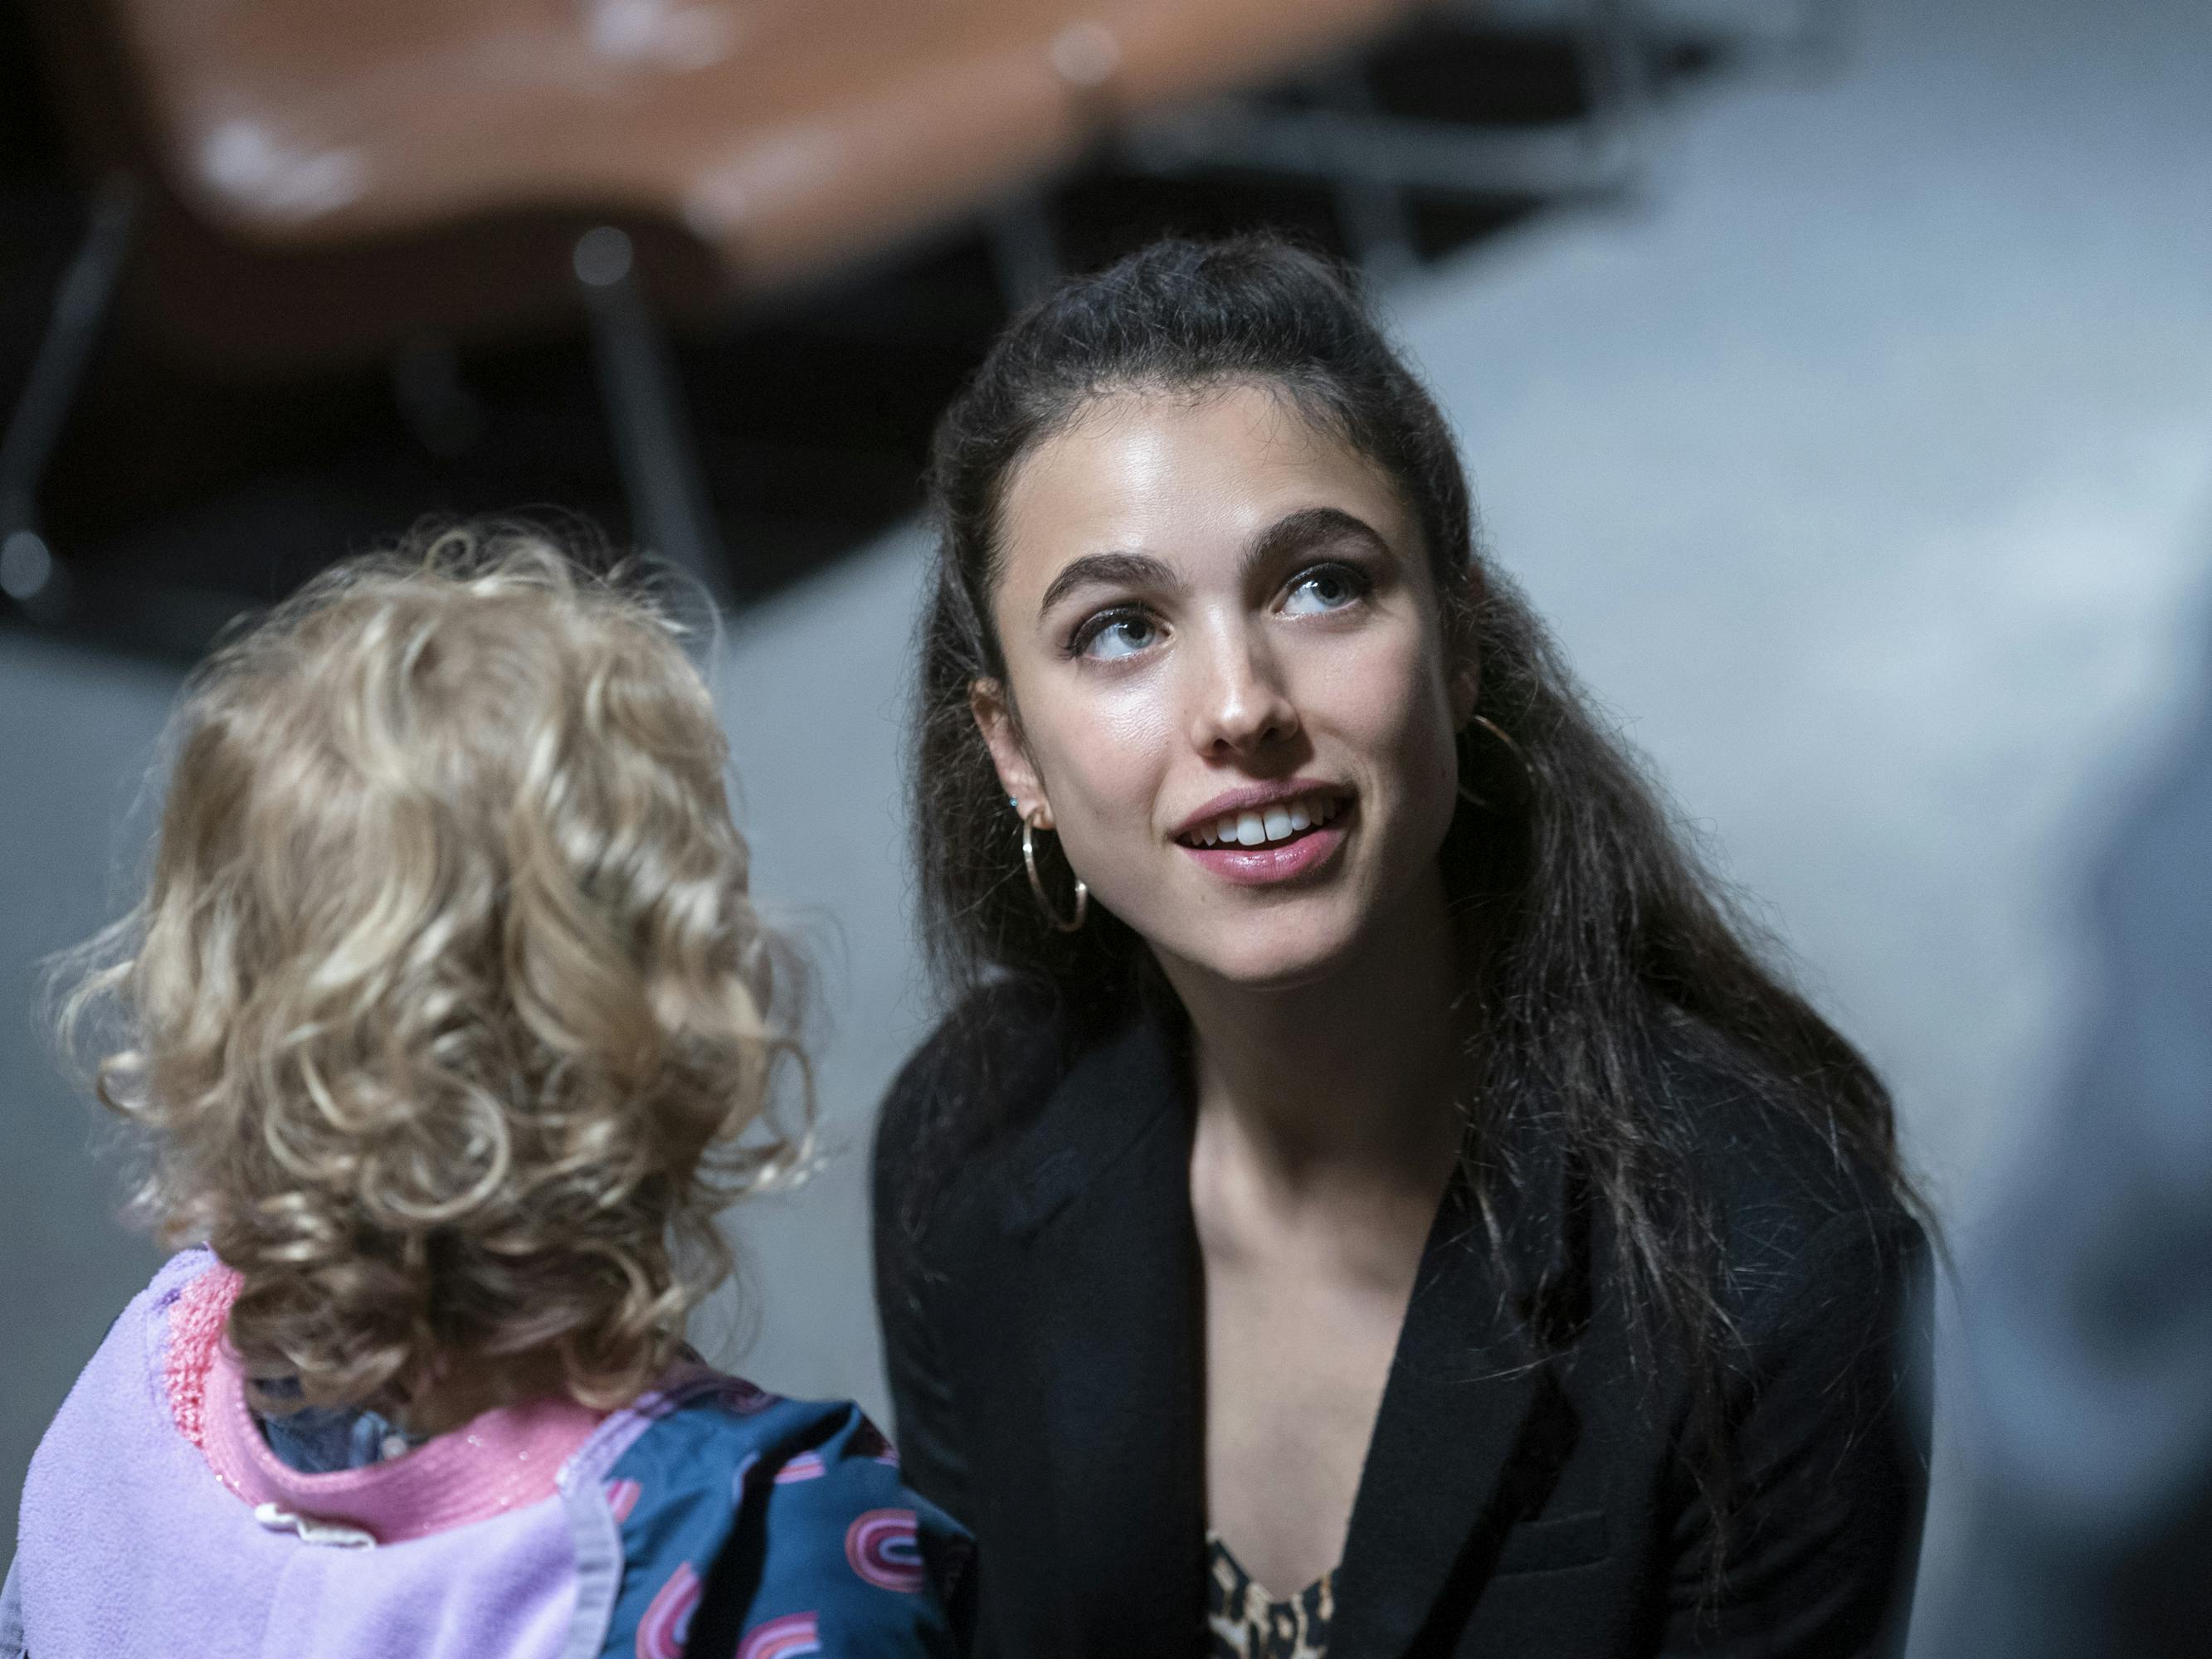 Maddy (Rylea Nevaeh Whittet) and Alex Russell (Margaret Qualley). Maddy wears a purple and pink top and Alex wears a black top and hoops.